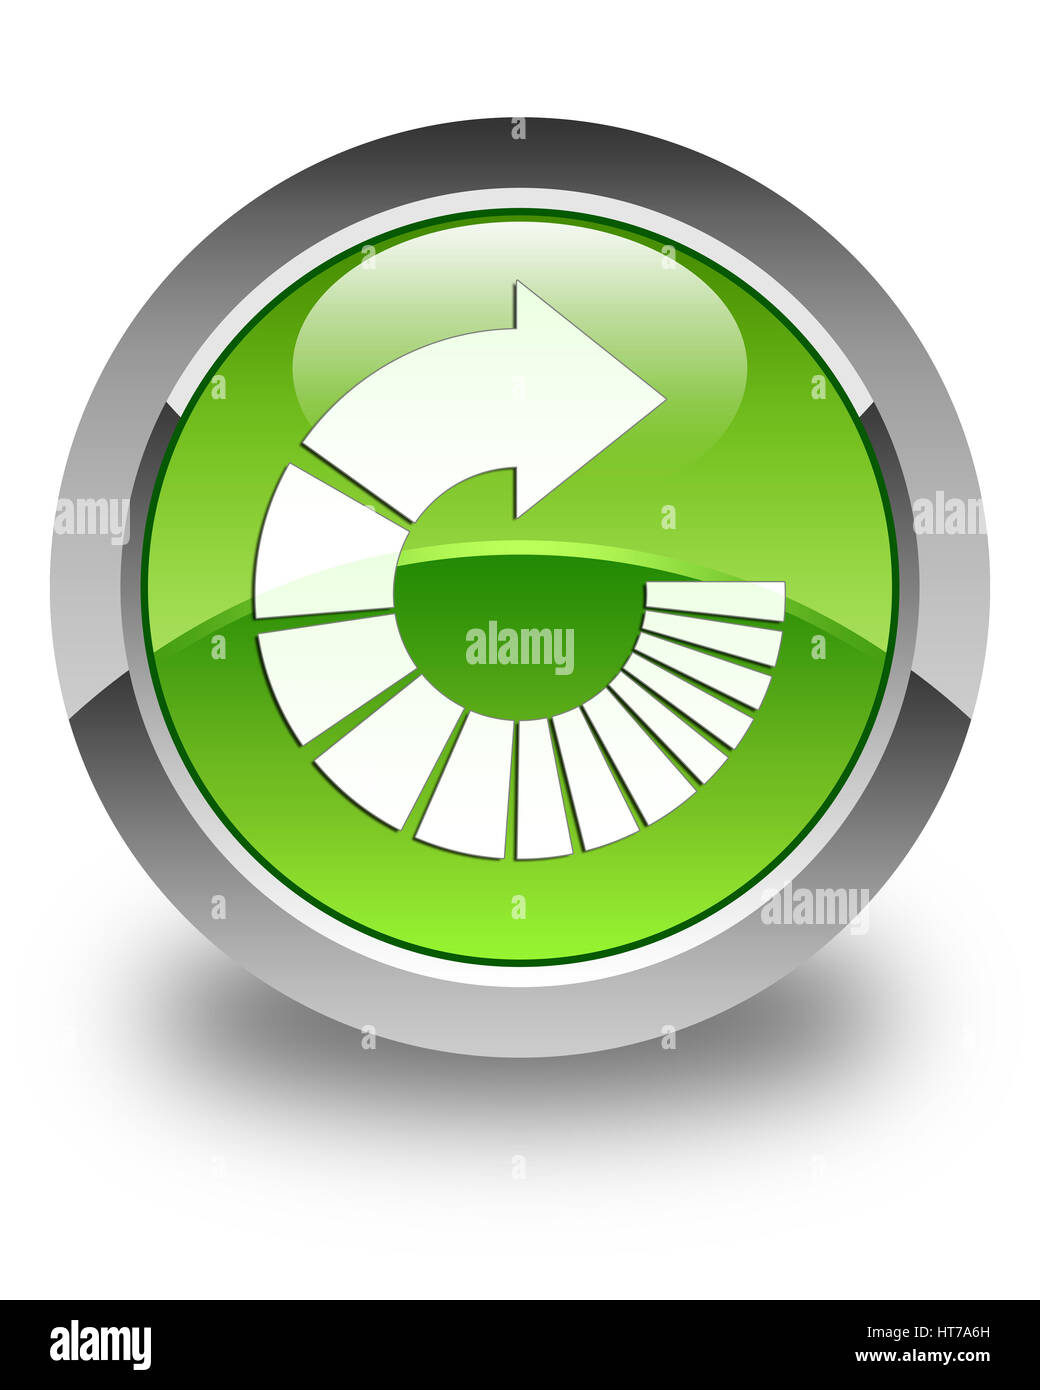 Rotate arrow icon isolated on glossy green round button abstract illustration Stock Photo